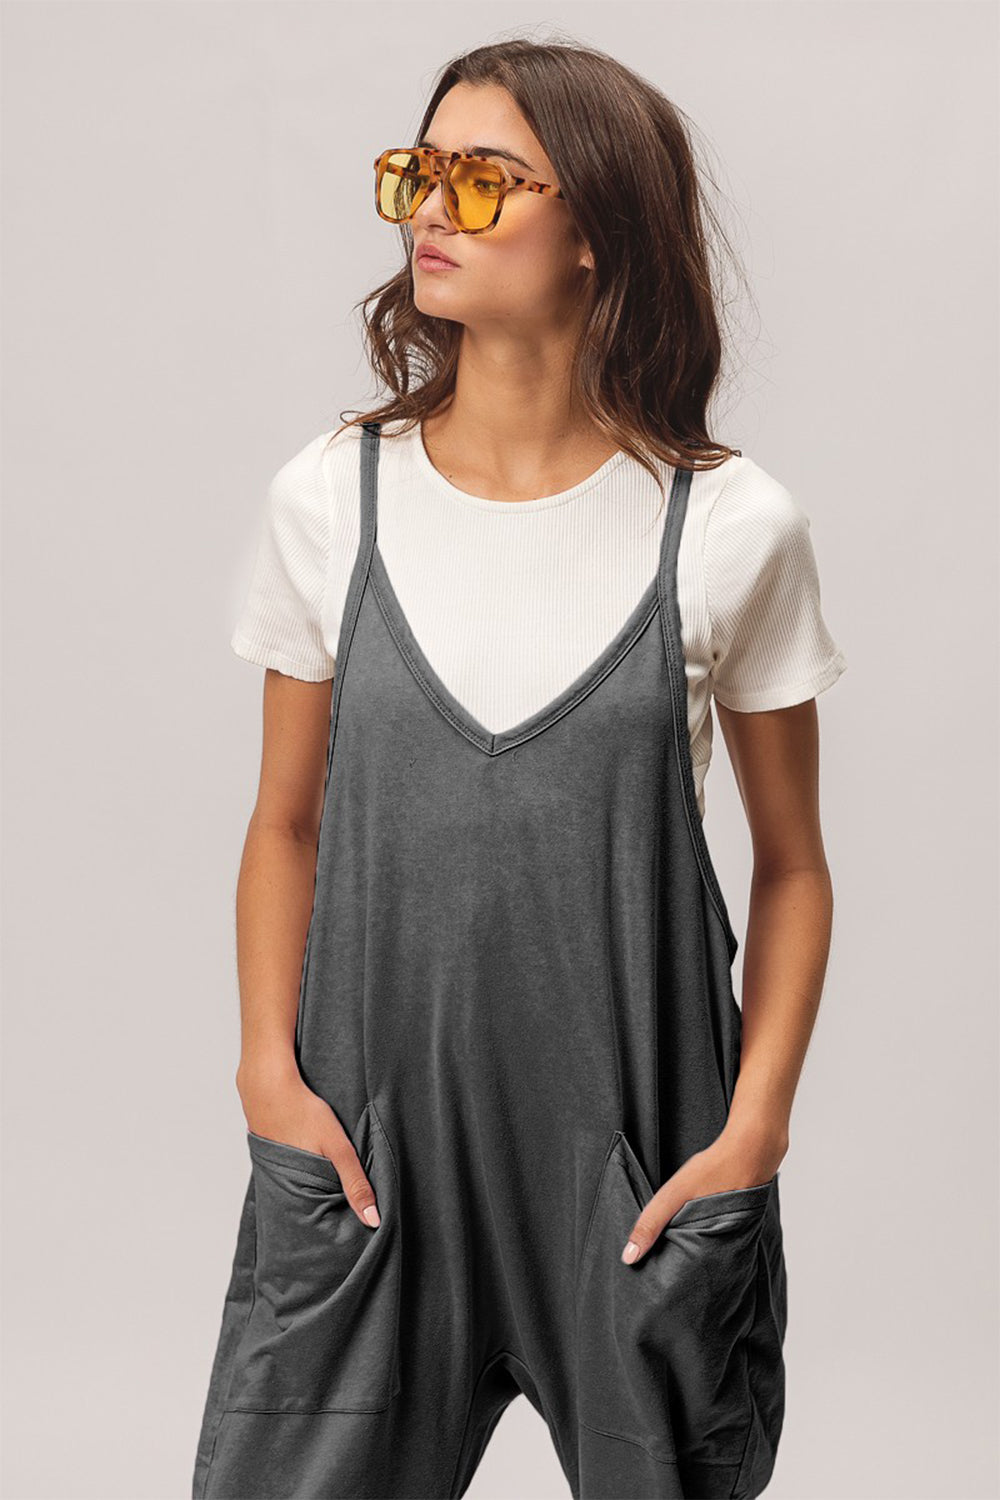 Charcoal Washed Sleeveless Overalls with Front Pockets